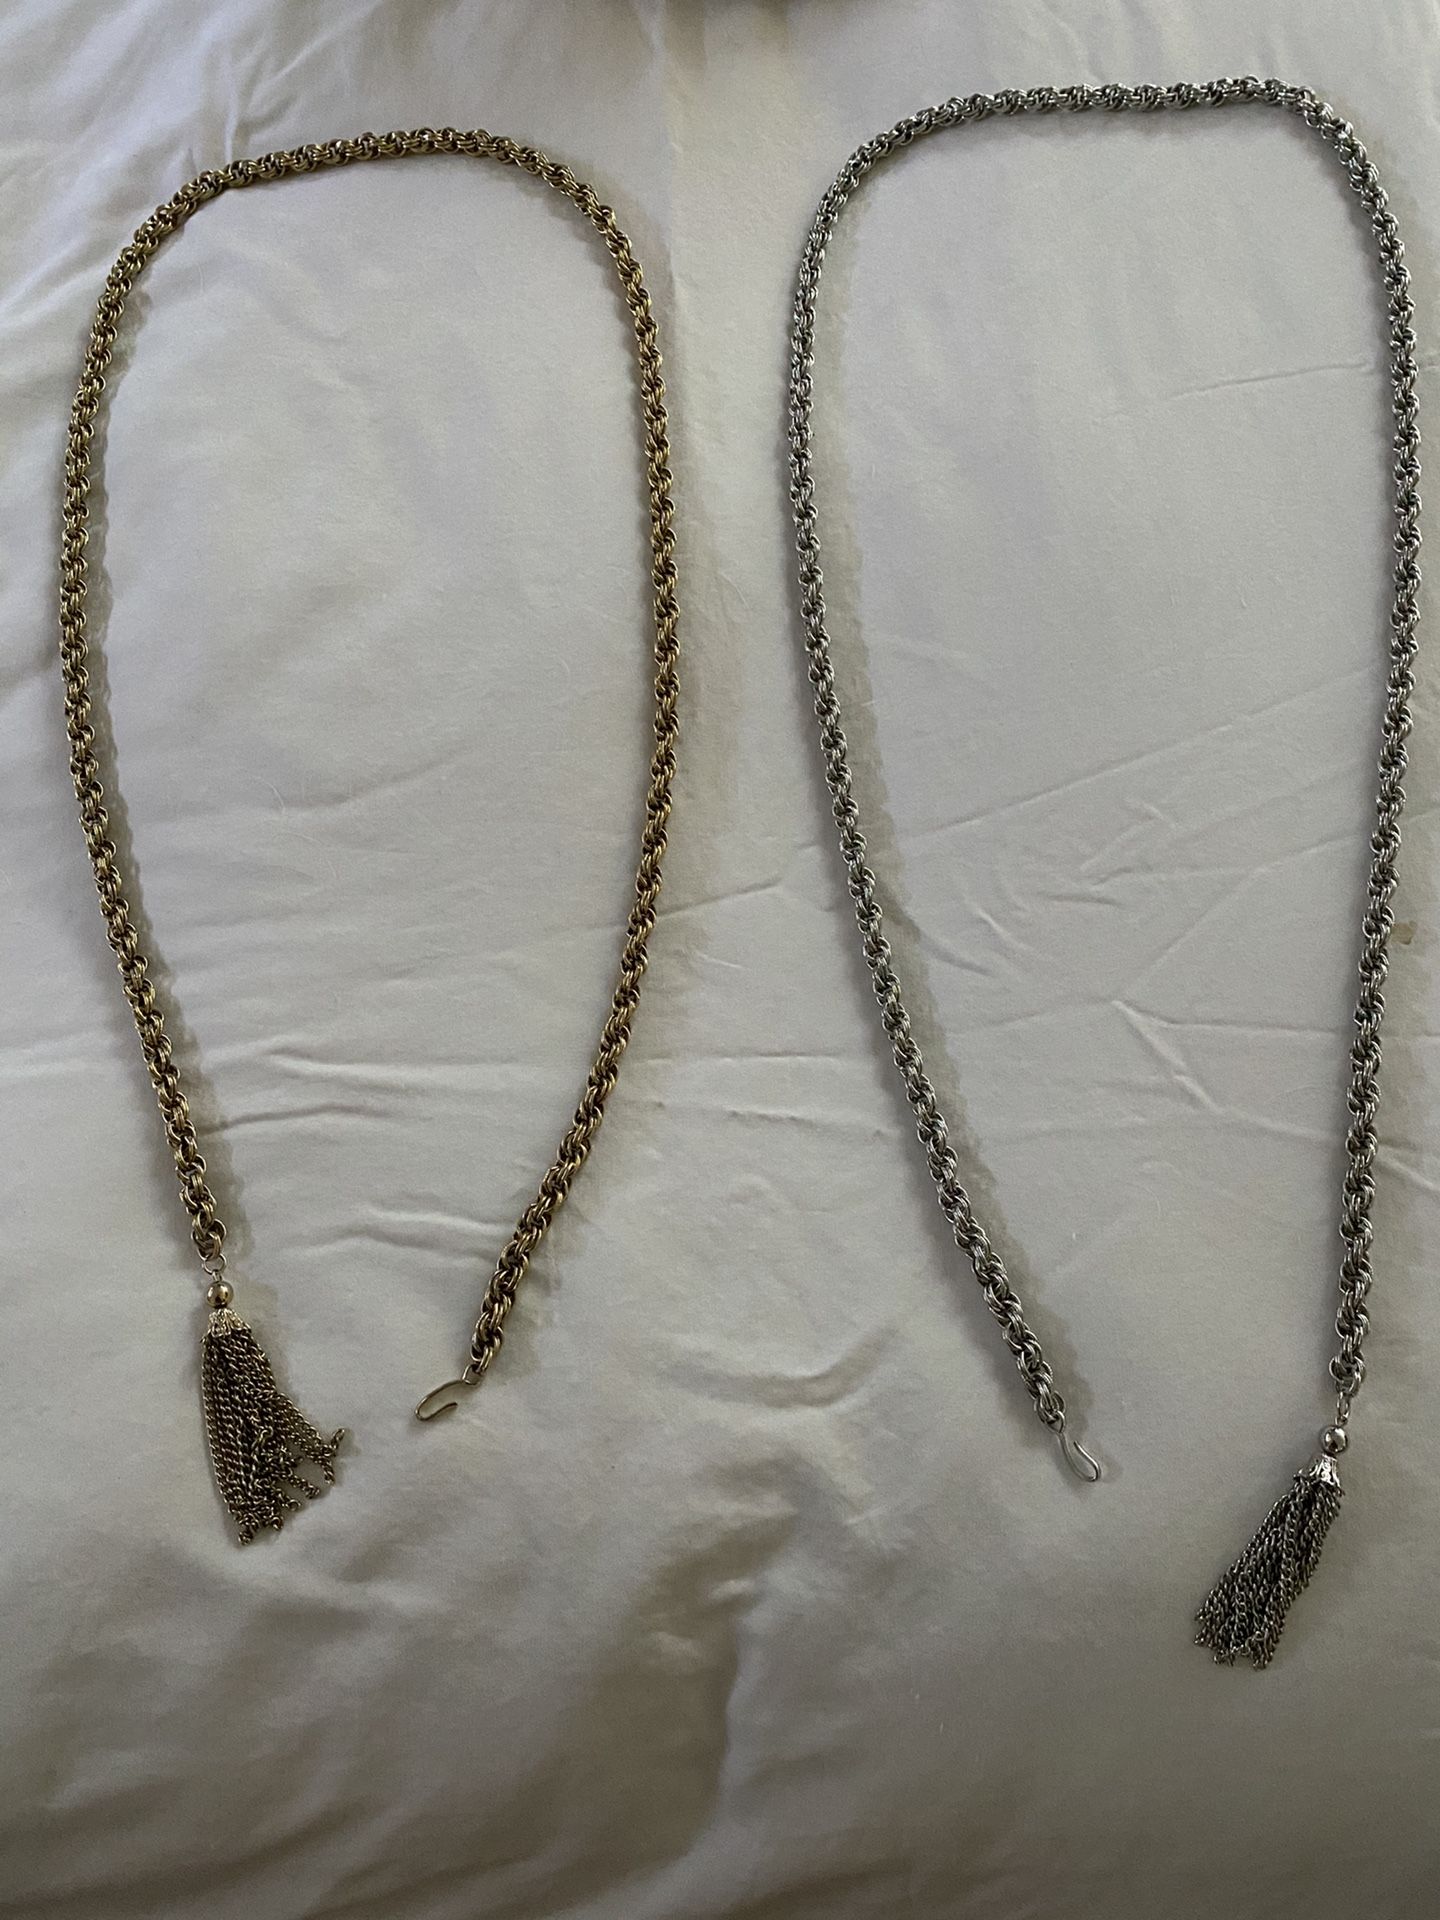 2 vintage heavy chain clip style belts (silver, gold colors) from the 70’s $8 each